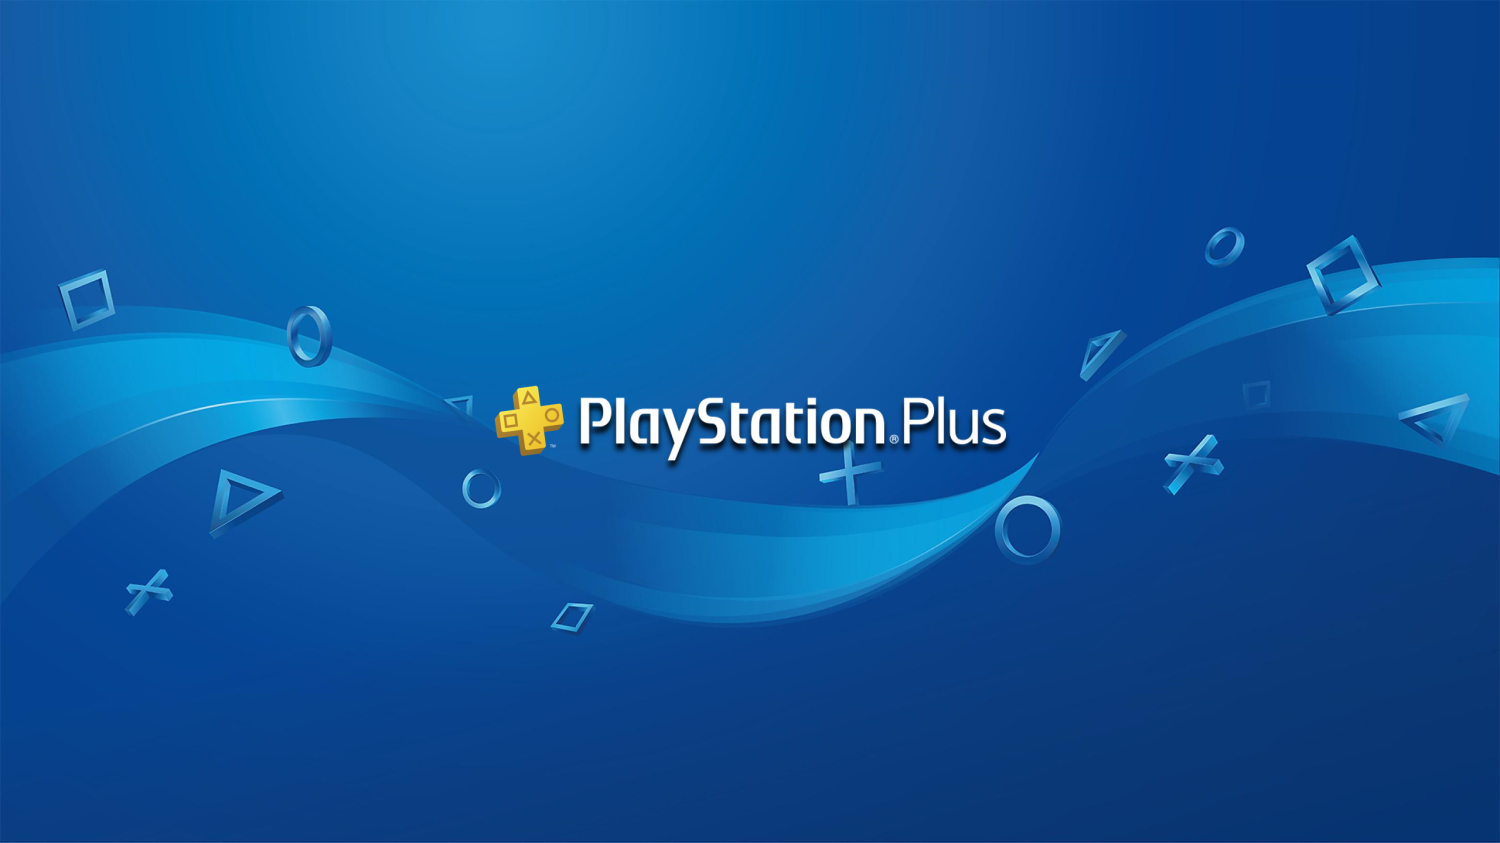 The revamped PlayStation Plus should hit the US on June 13th